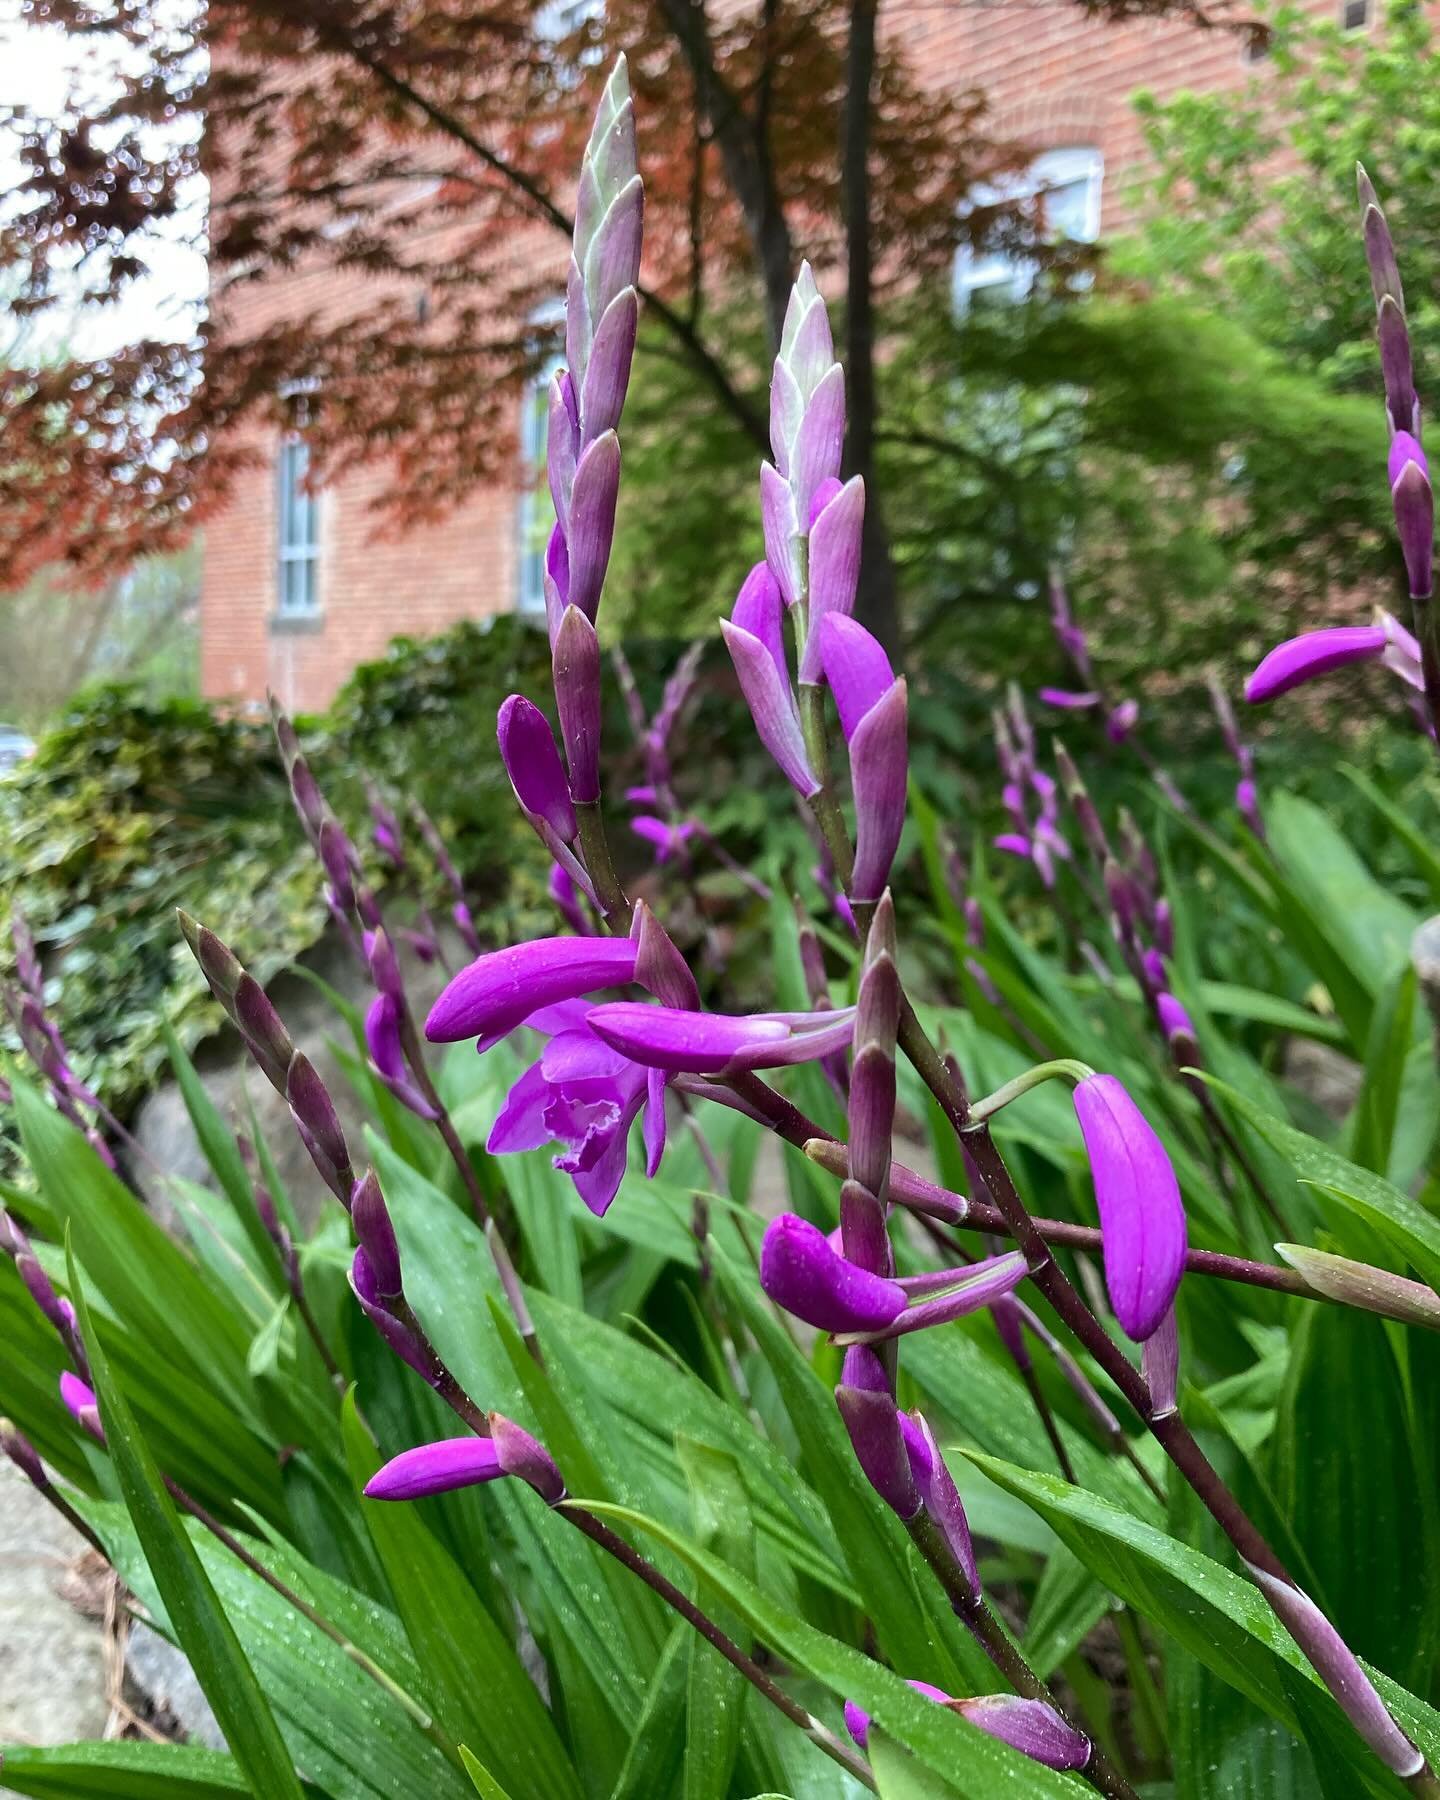 Historic garden week in Virginia is April 20-27 this year, and Petersburg homes and gardens are open on Tuesday, April 23rd. Come for a visit and see what's blooming!